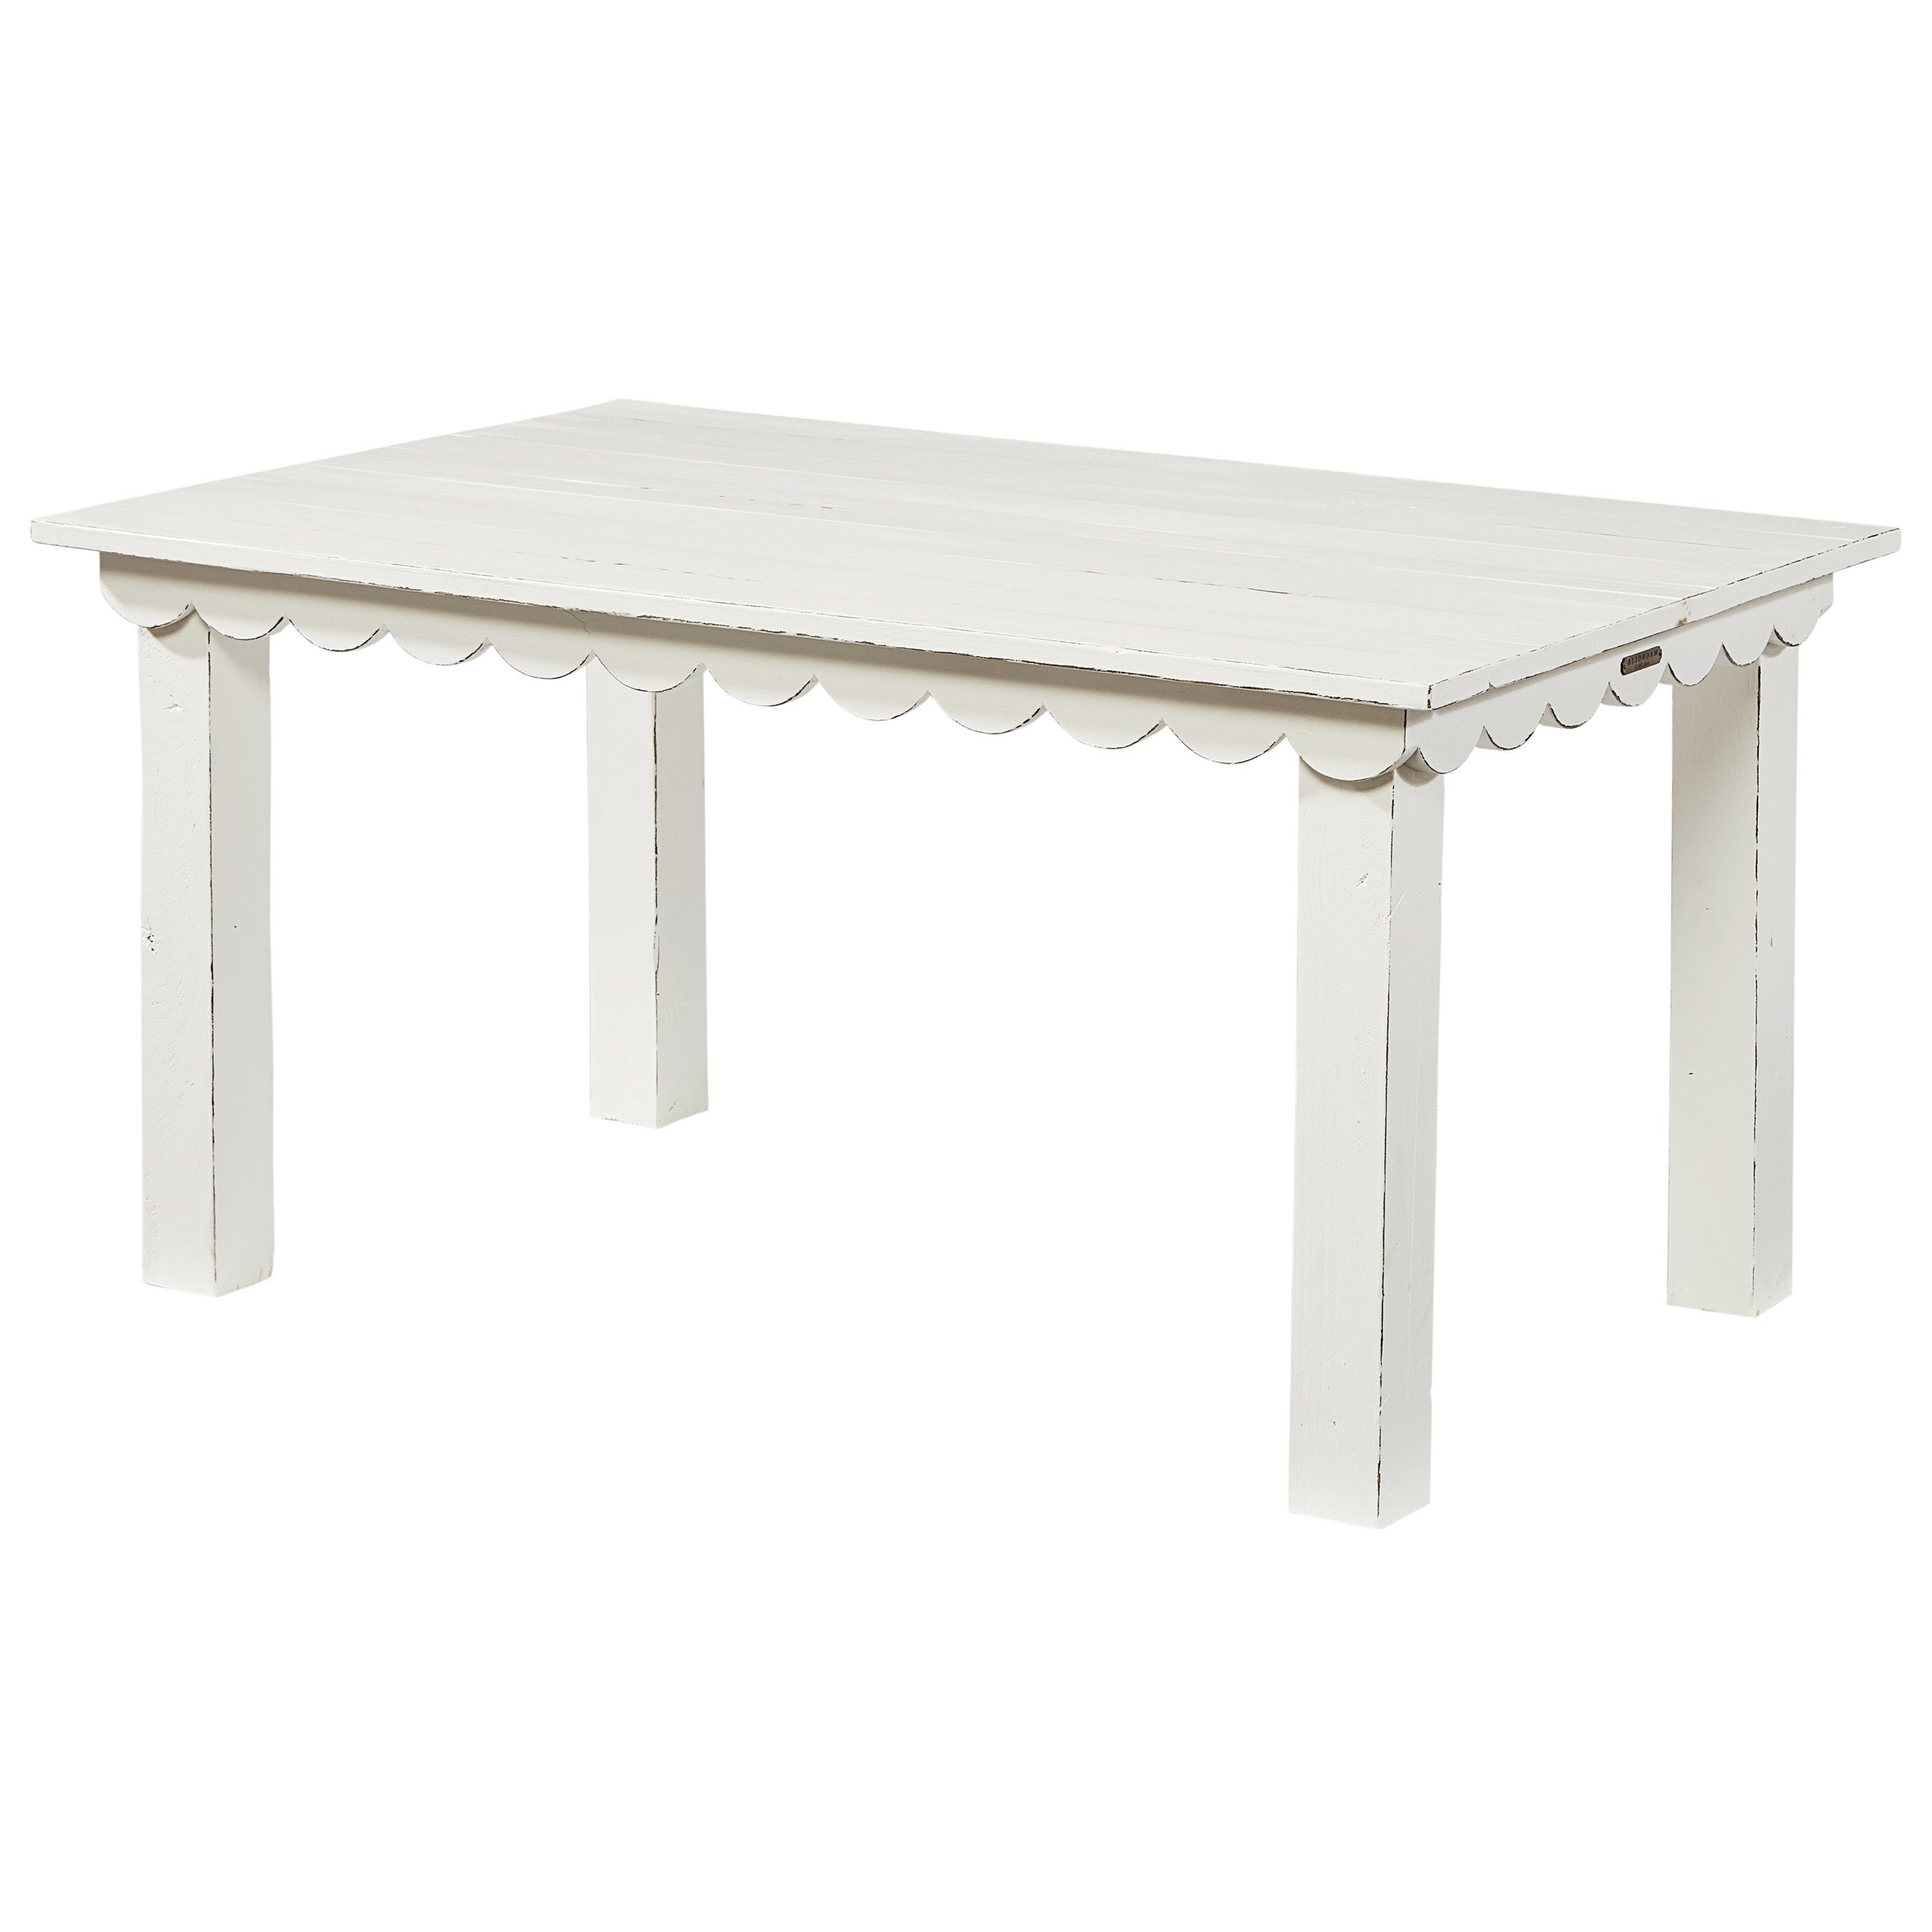 Magnolia Home Scallop Antique White Cocktail Tables Within 2018 Kid's Table With Scalloped Trim And Square Legsmagnolia Home (View 5 of 20)